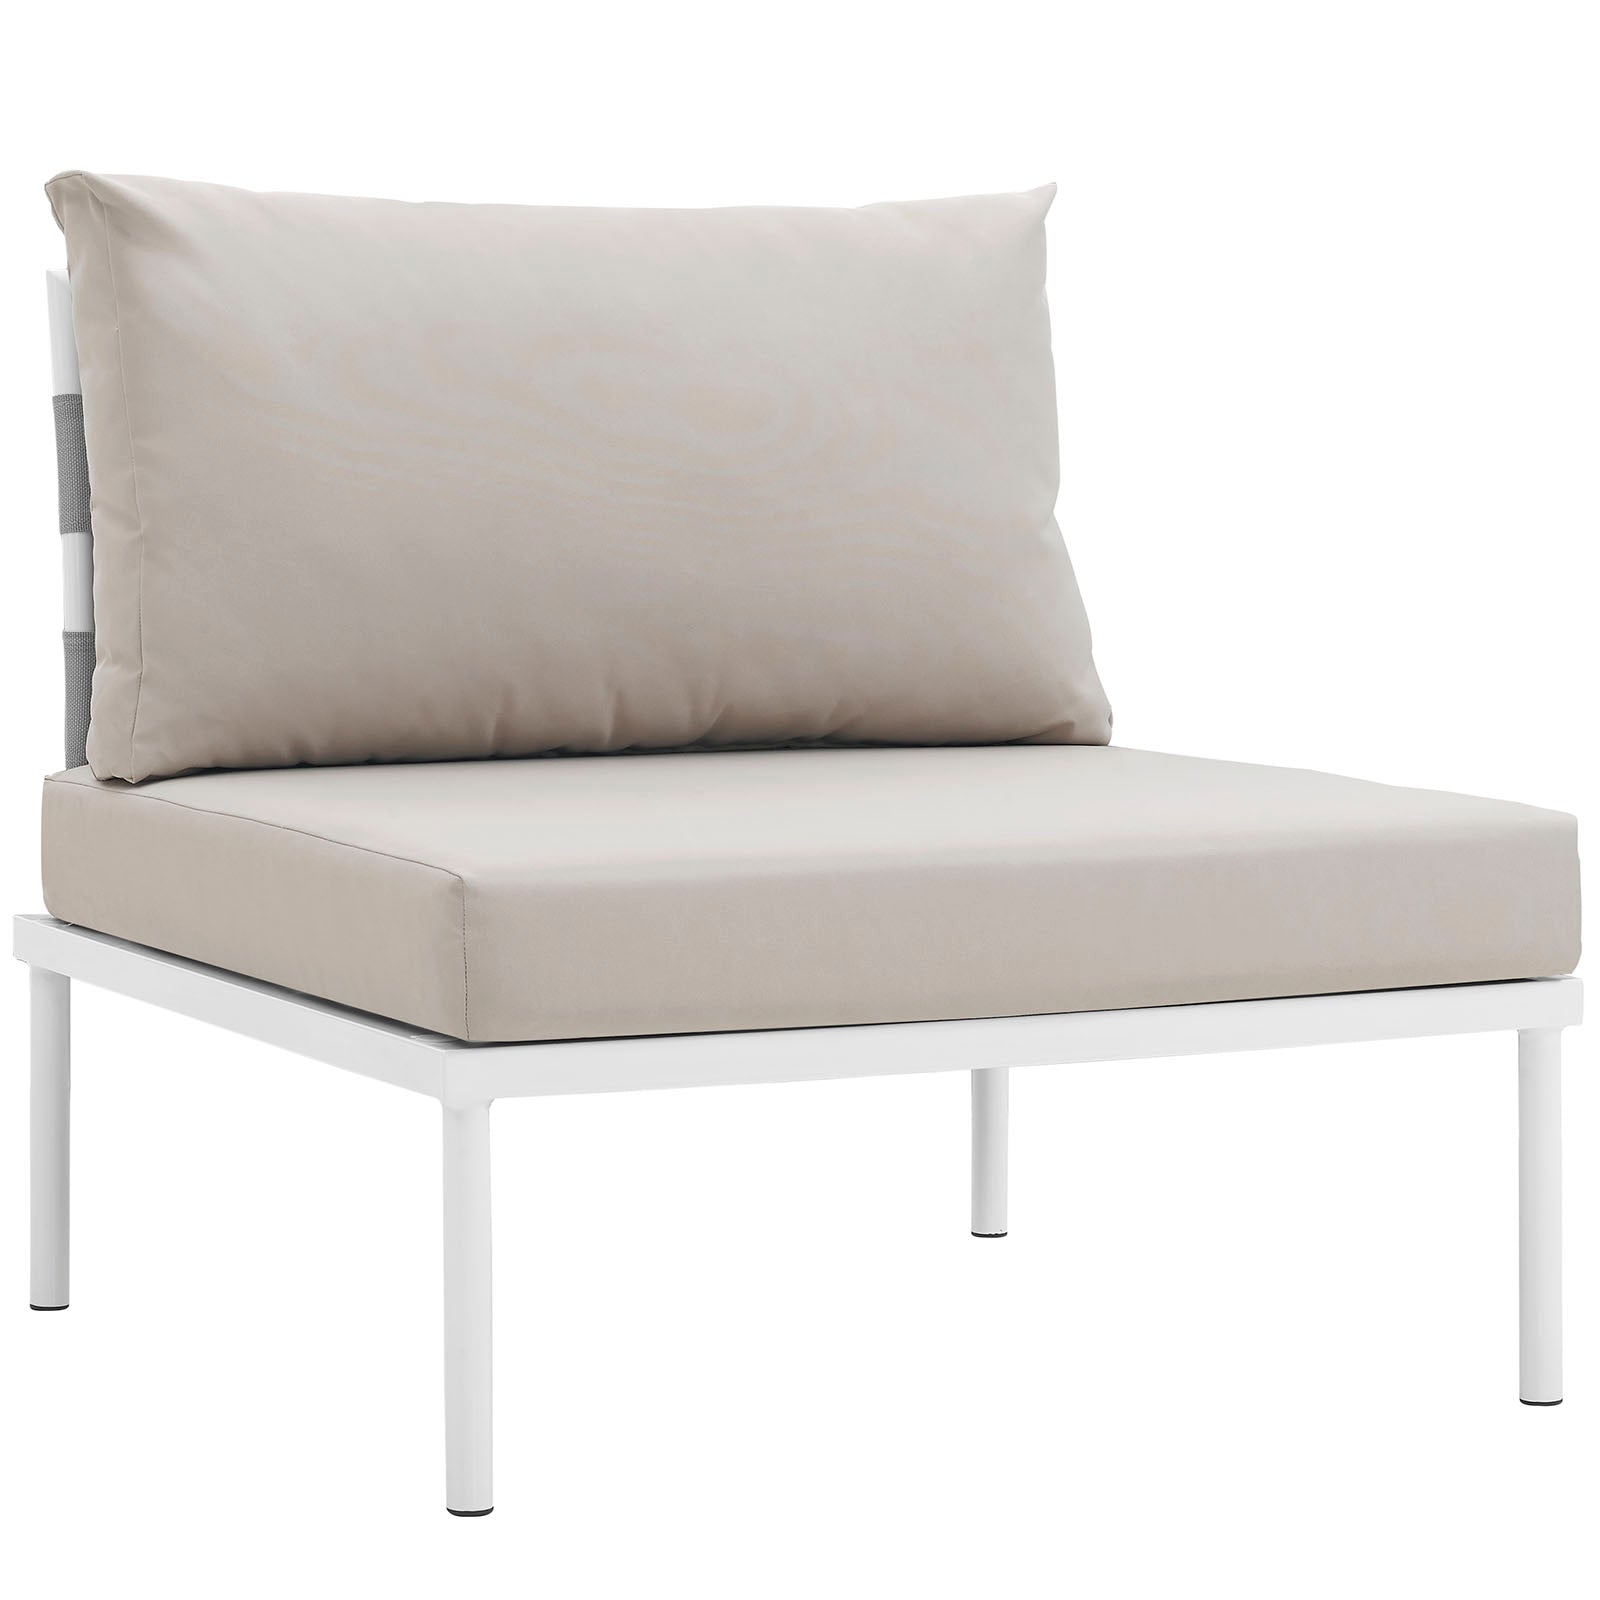 Modway Outdoor Chairs - Harmony Armless Outdoor Chair White & Beige